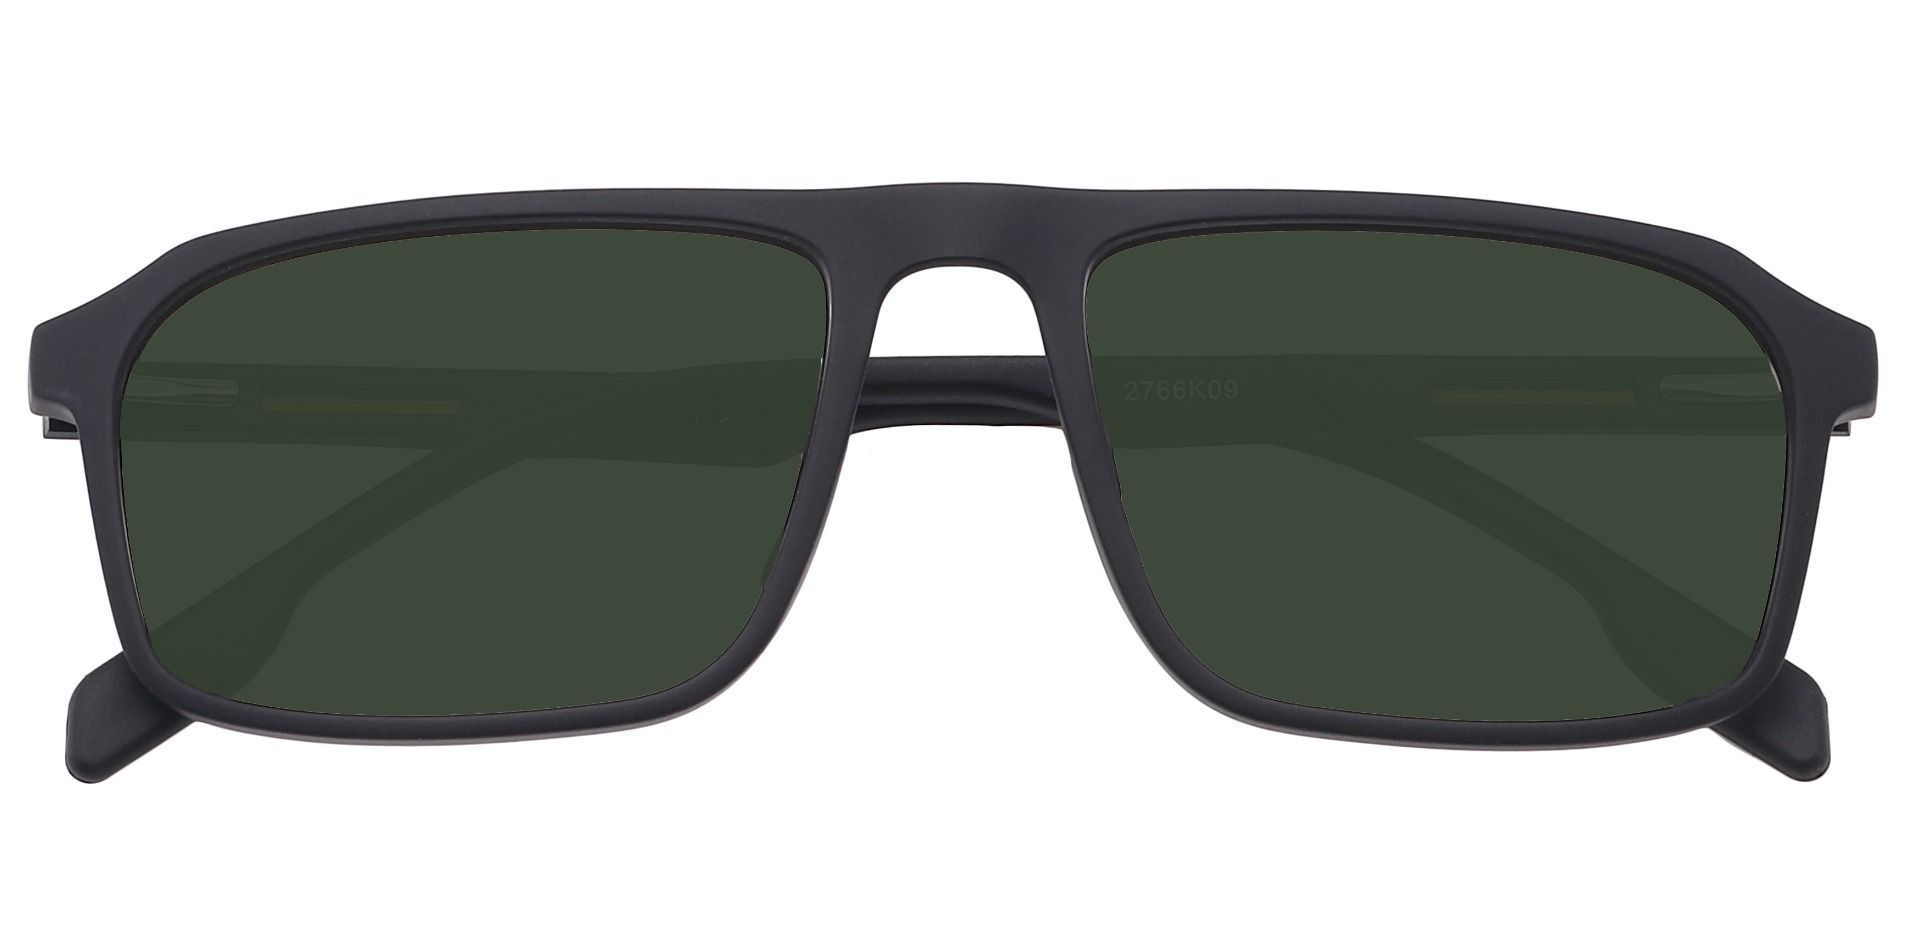 Hector Rectangle Reading Sunglasses - Black Frame With Green Lenses